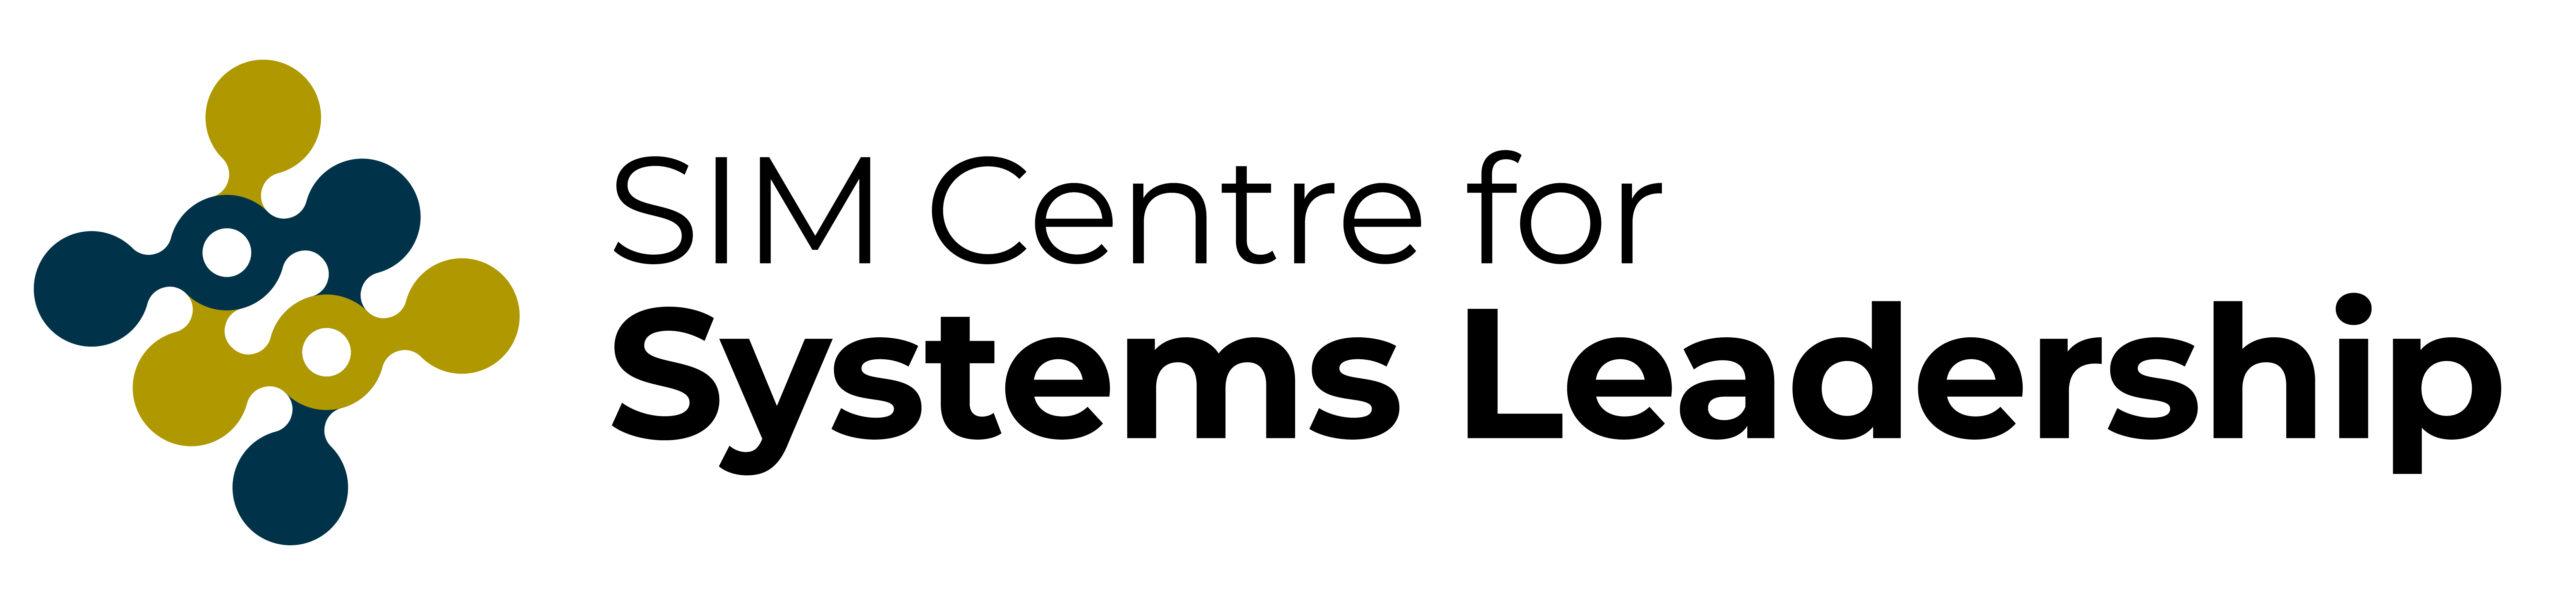 SIM Centre For Systems Leadership